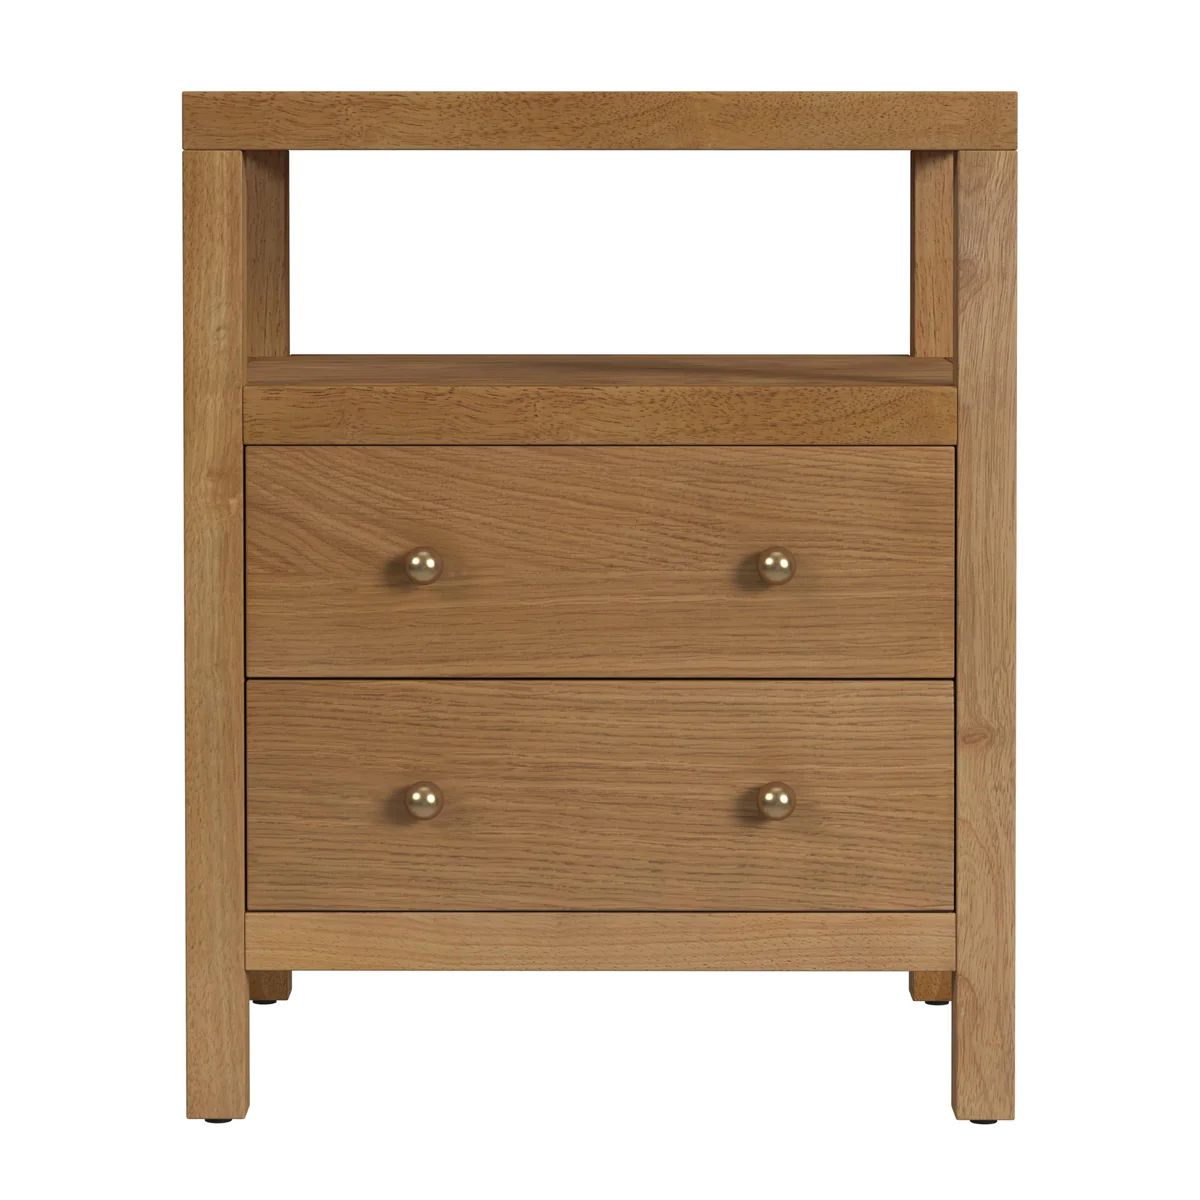 Traditional Two Drawer Nightstand in Light Natural Finish | The Well Appointed House, LLC